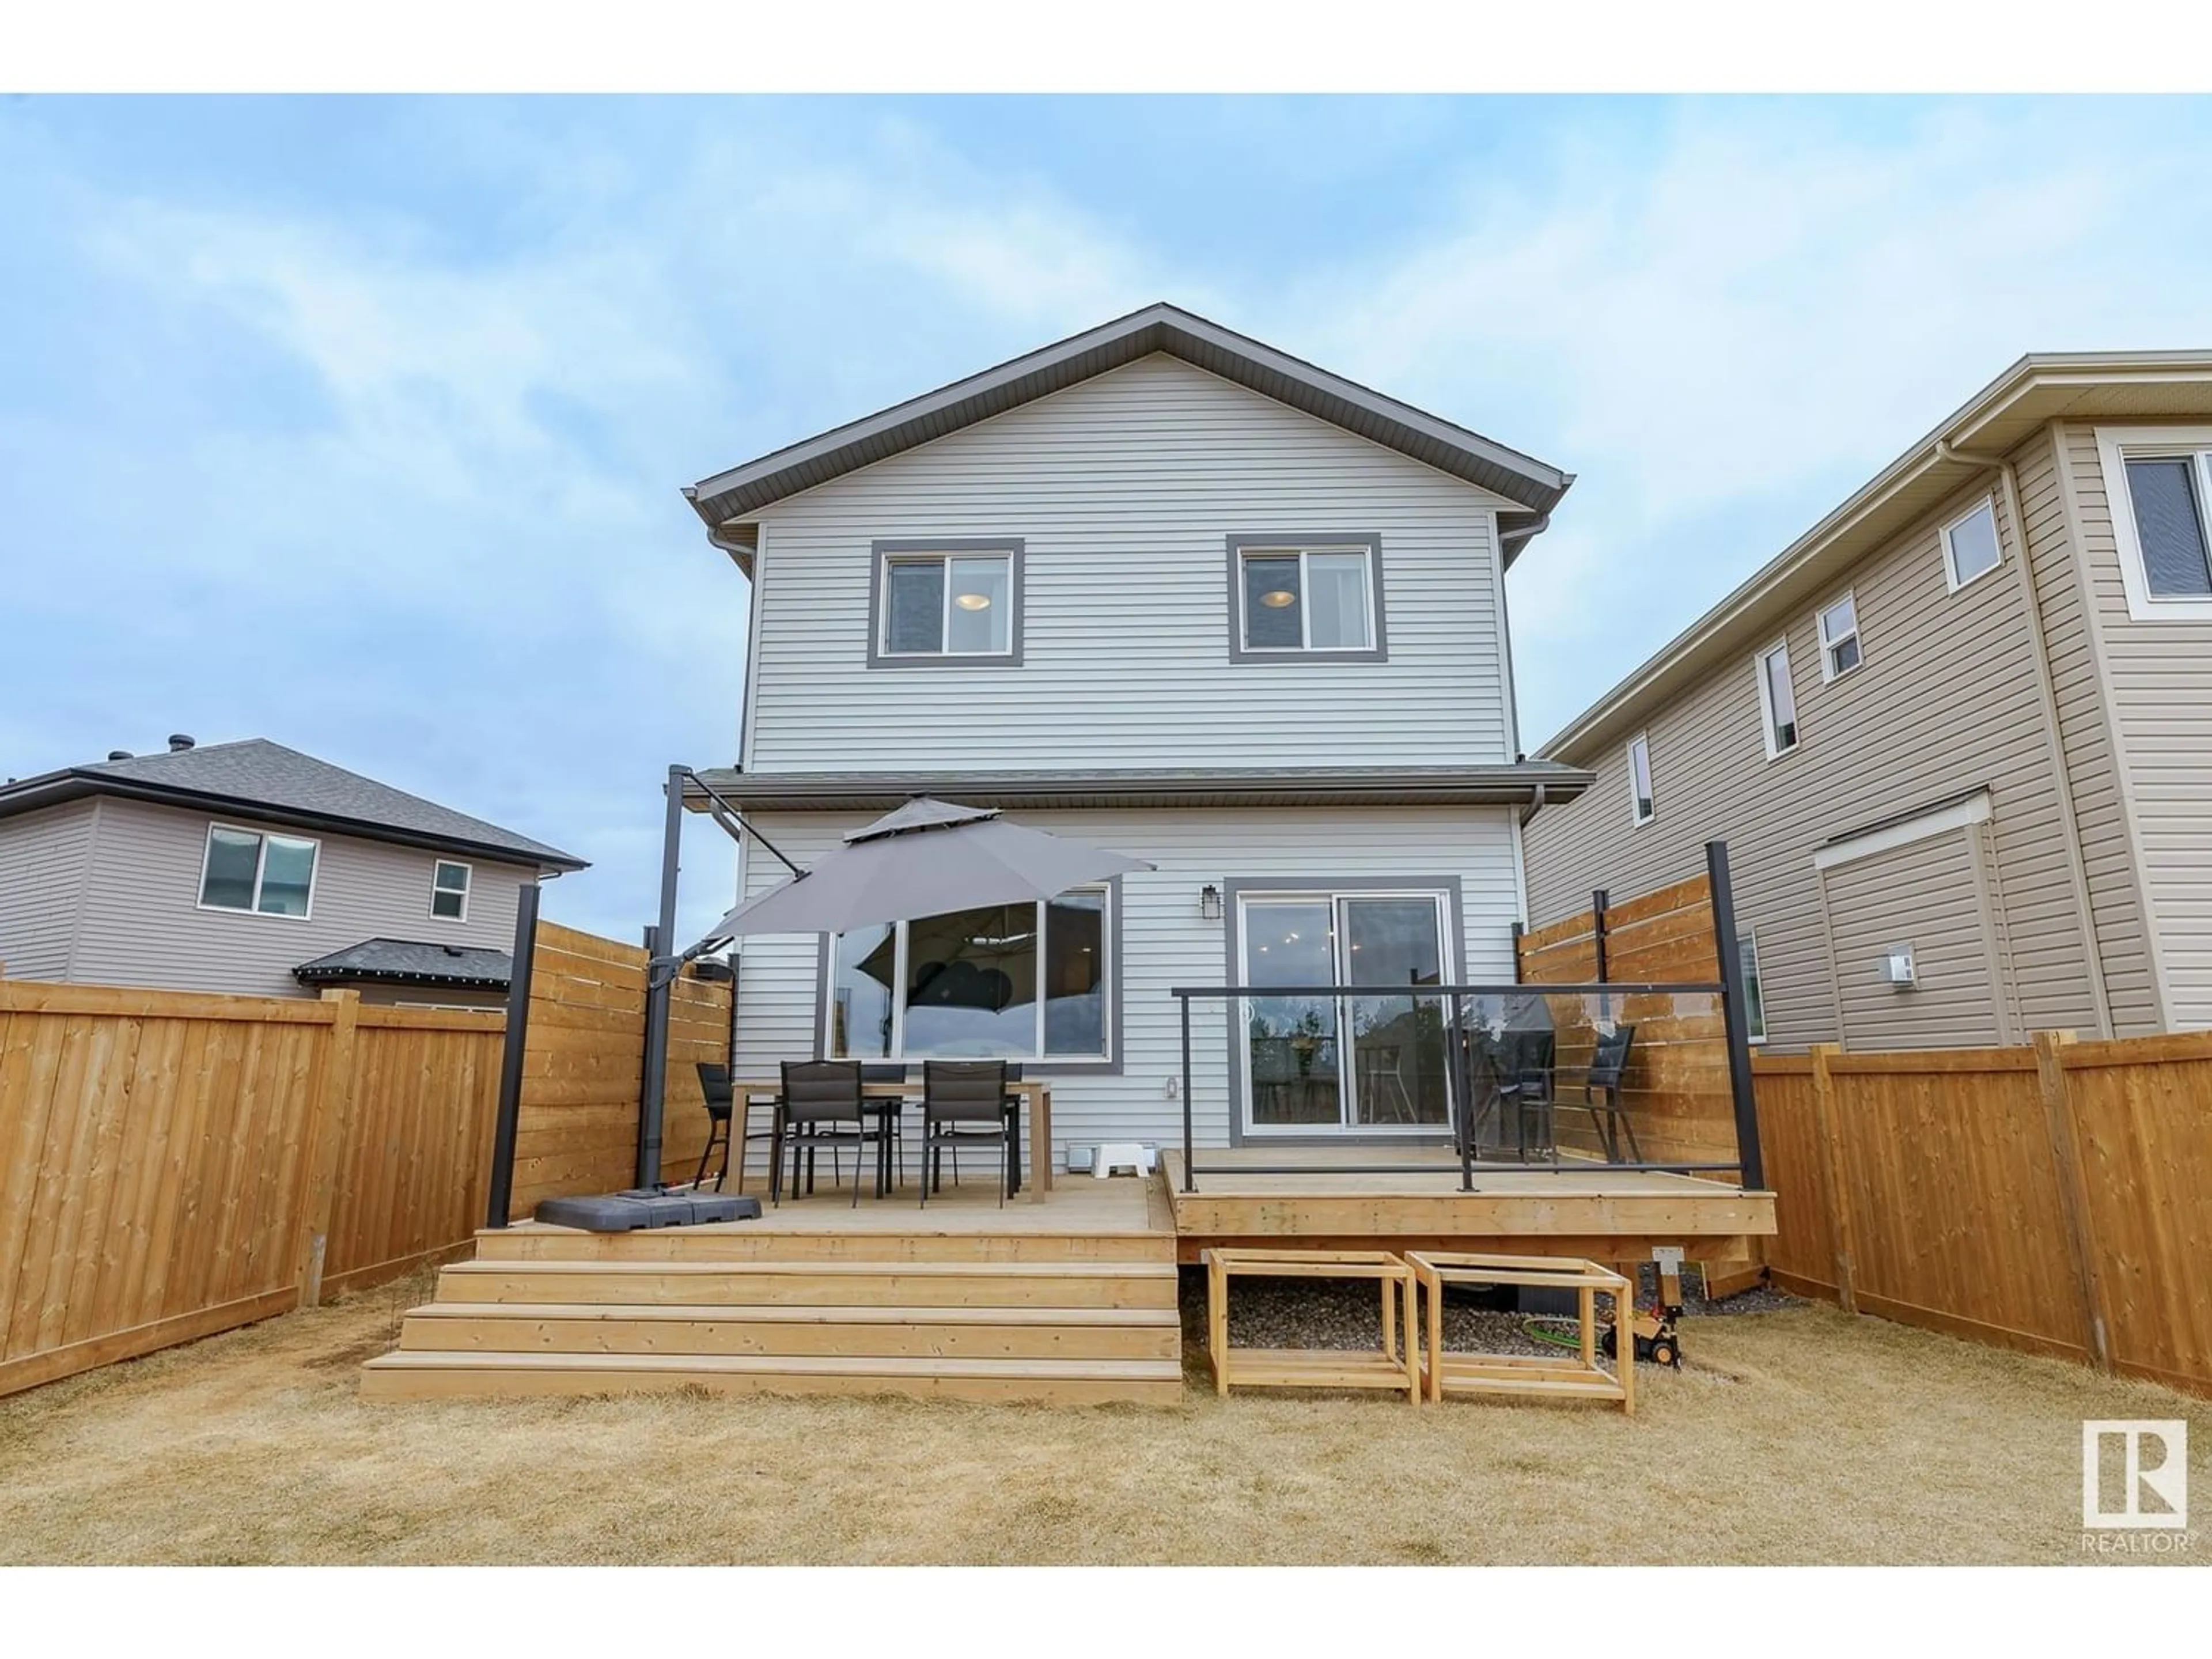 Frontside or backside of a home for 17111 46 ST NW, Edmonton Alberta T5Y4B1